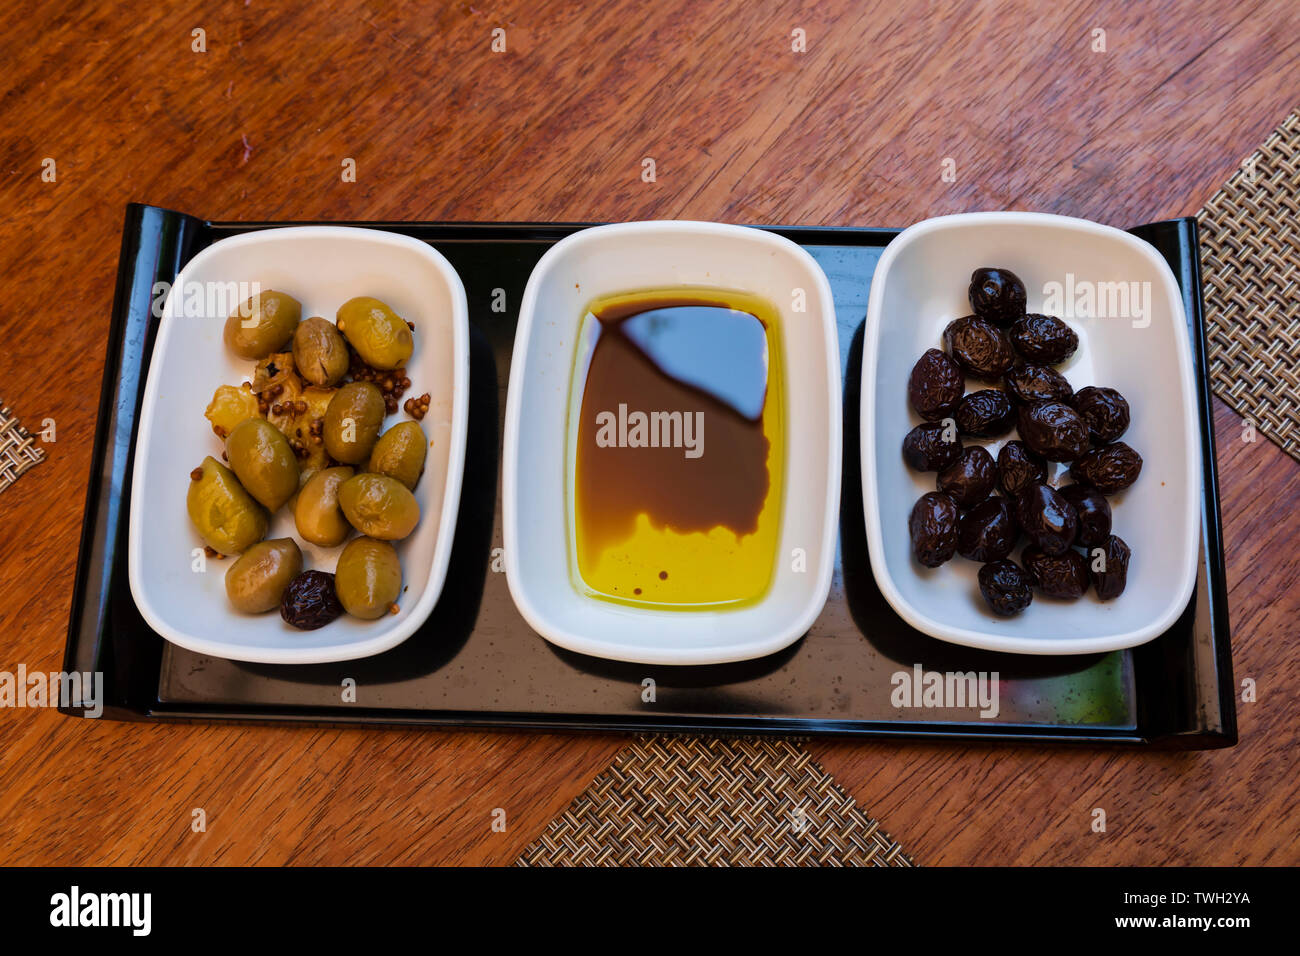 A selection of green and black olives with olive oil and balsamic vinegar.  Turkish Republic of Northern Cyprus. Stock Photo